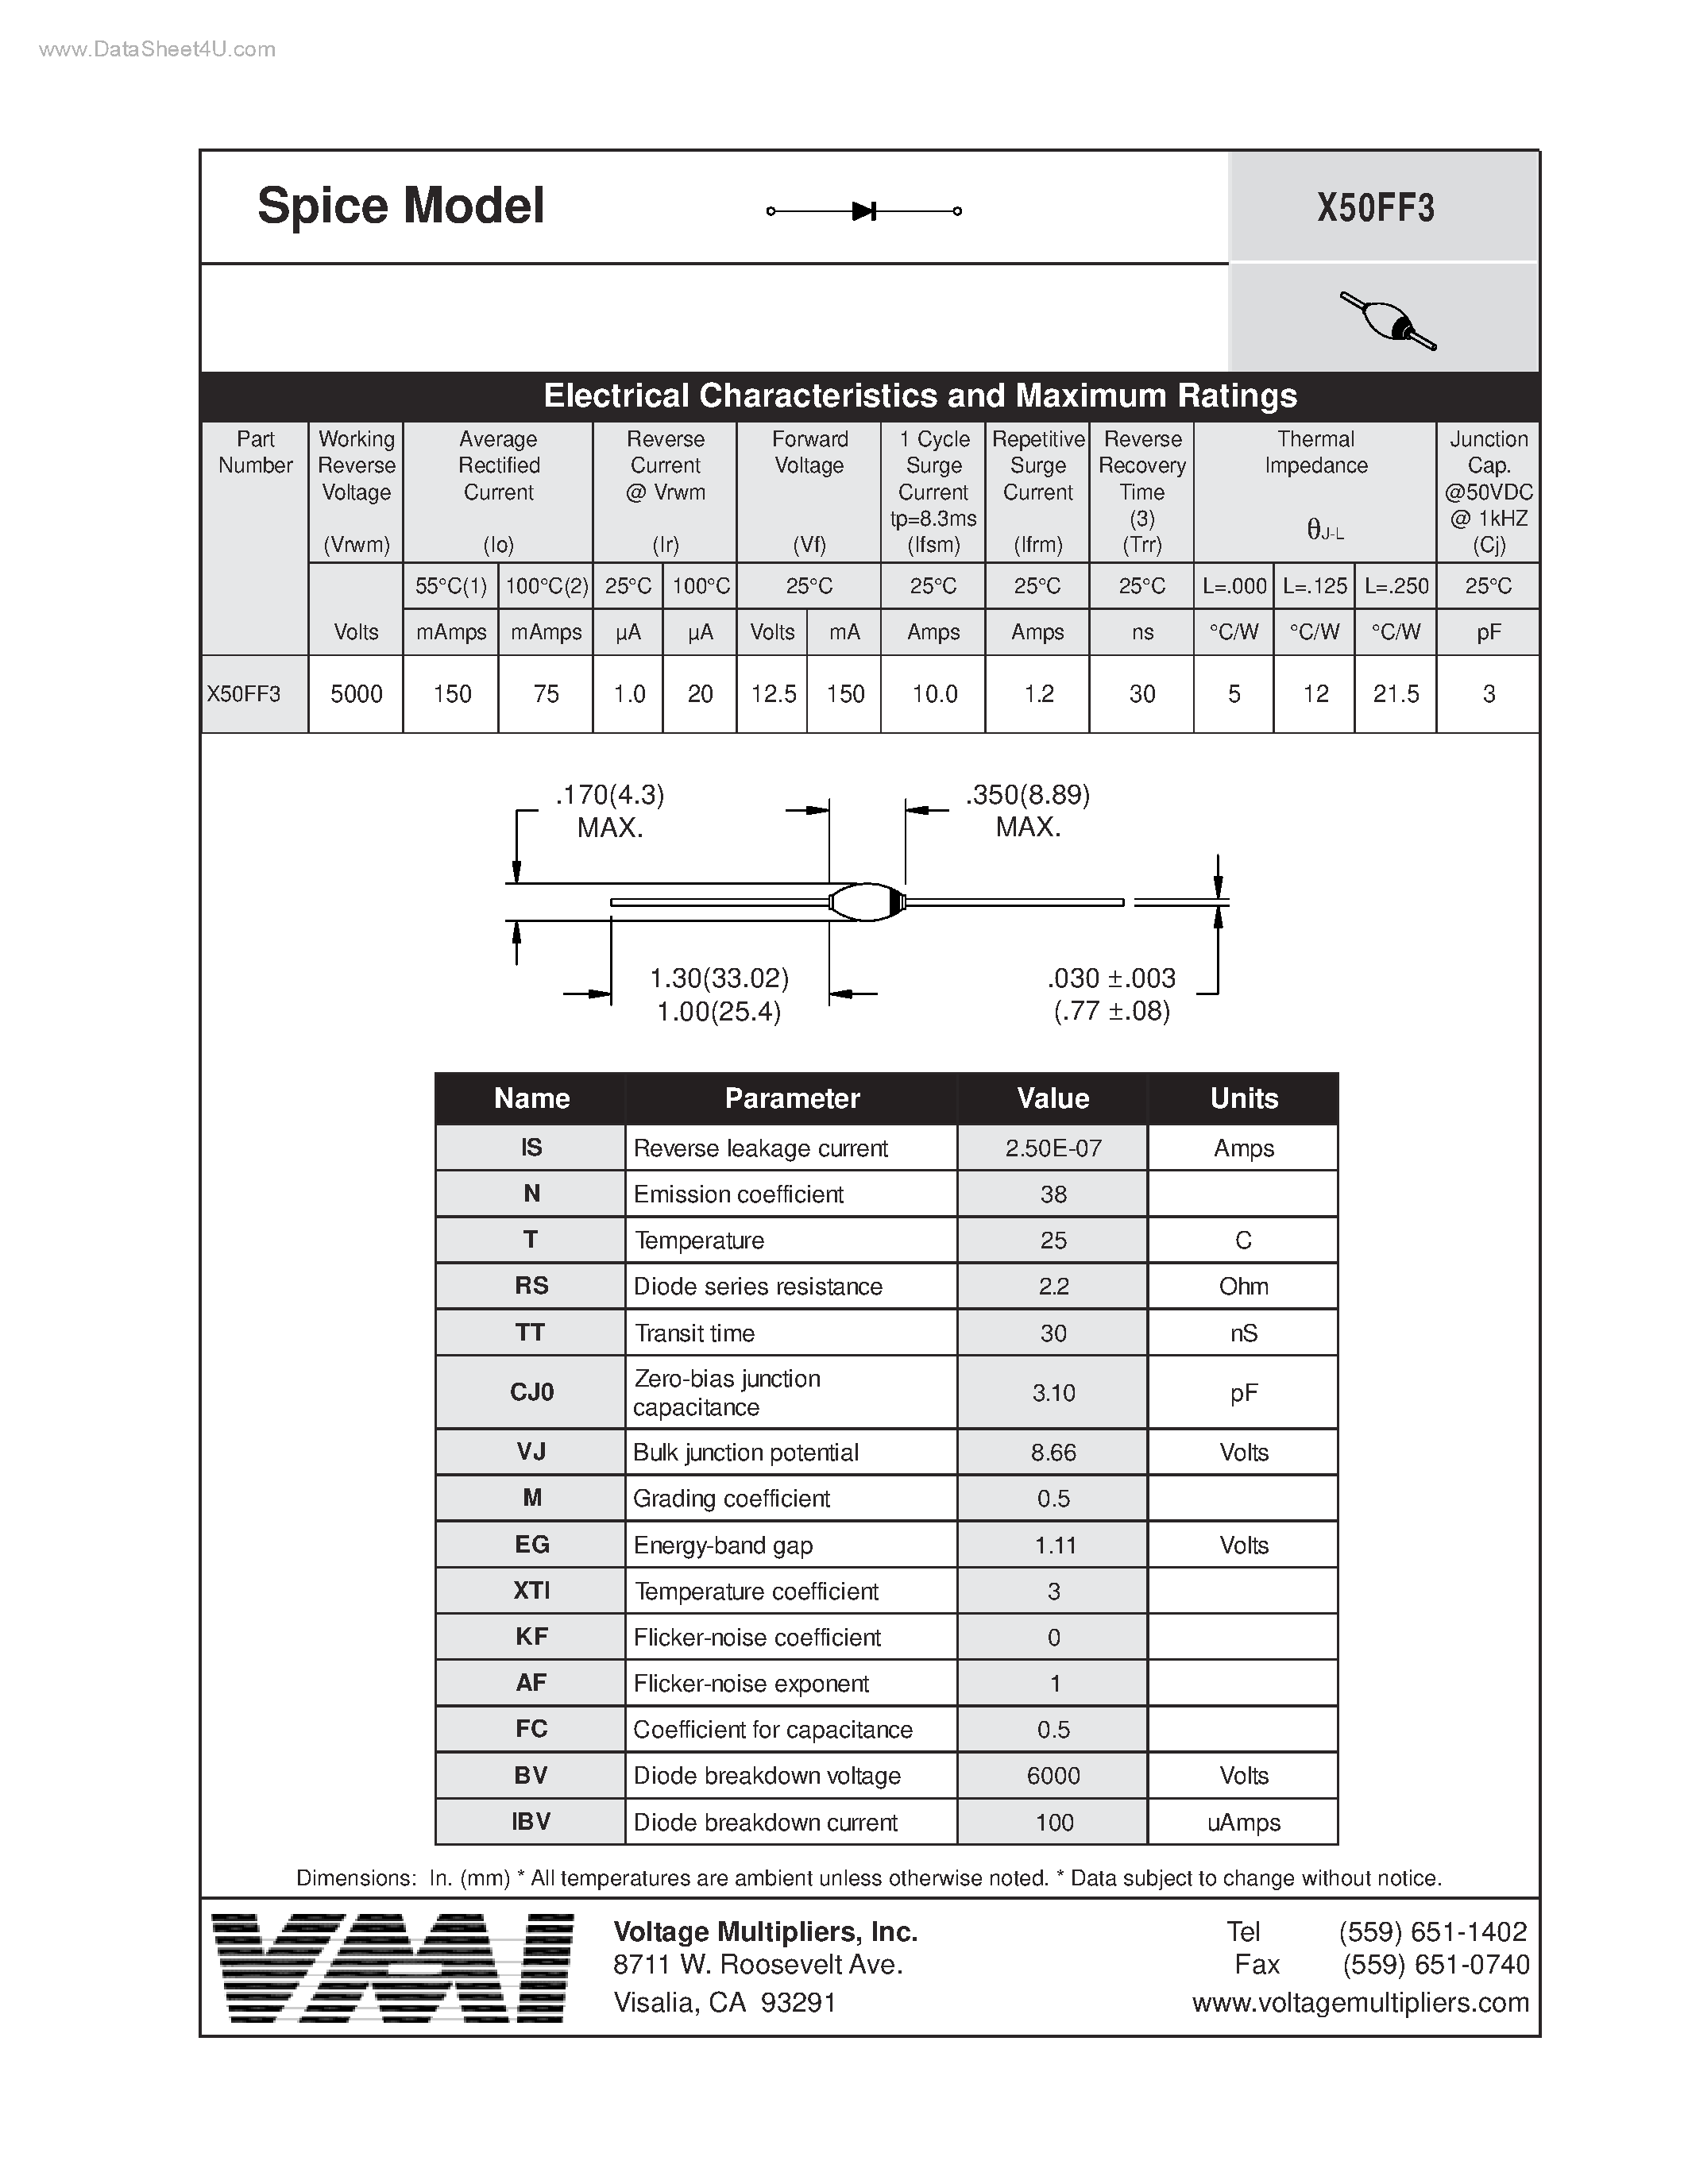 Datasheet X50FF3 - Spice Model page 1